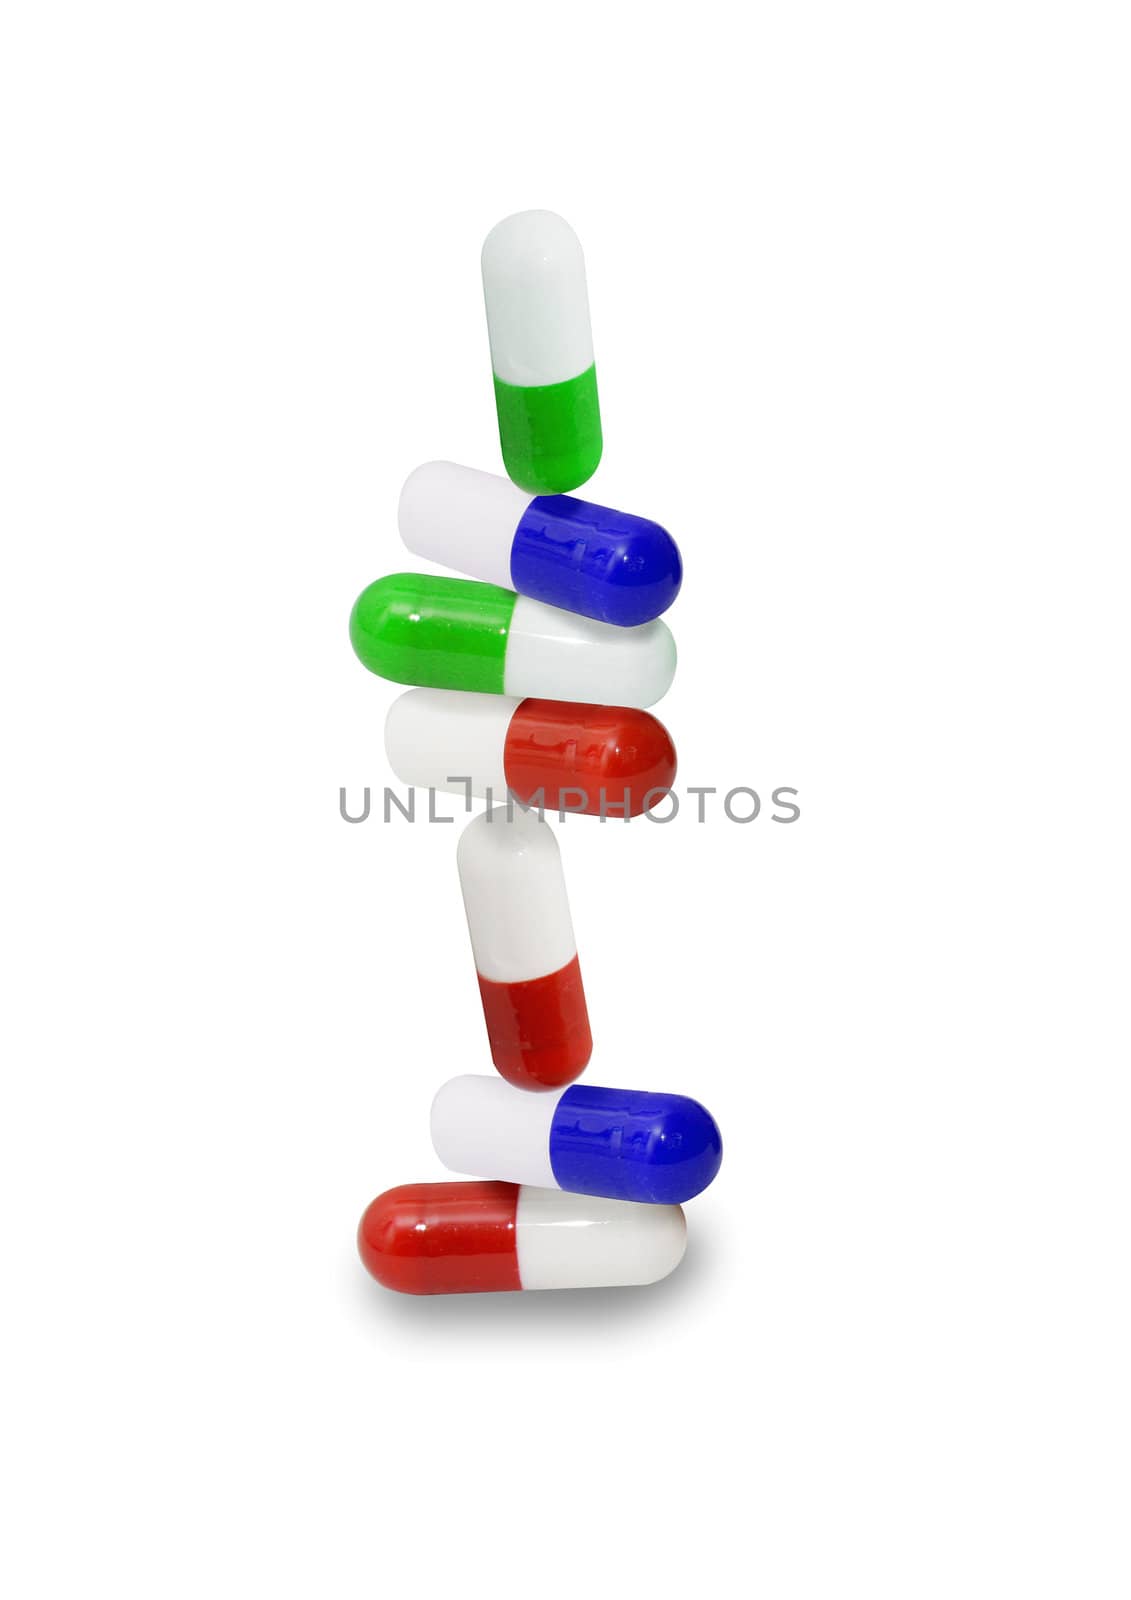 Pills in a stack by leeser